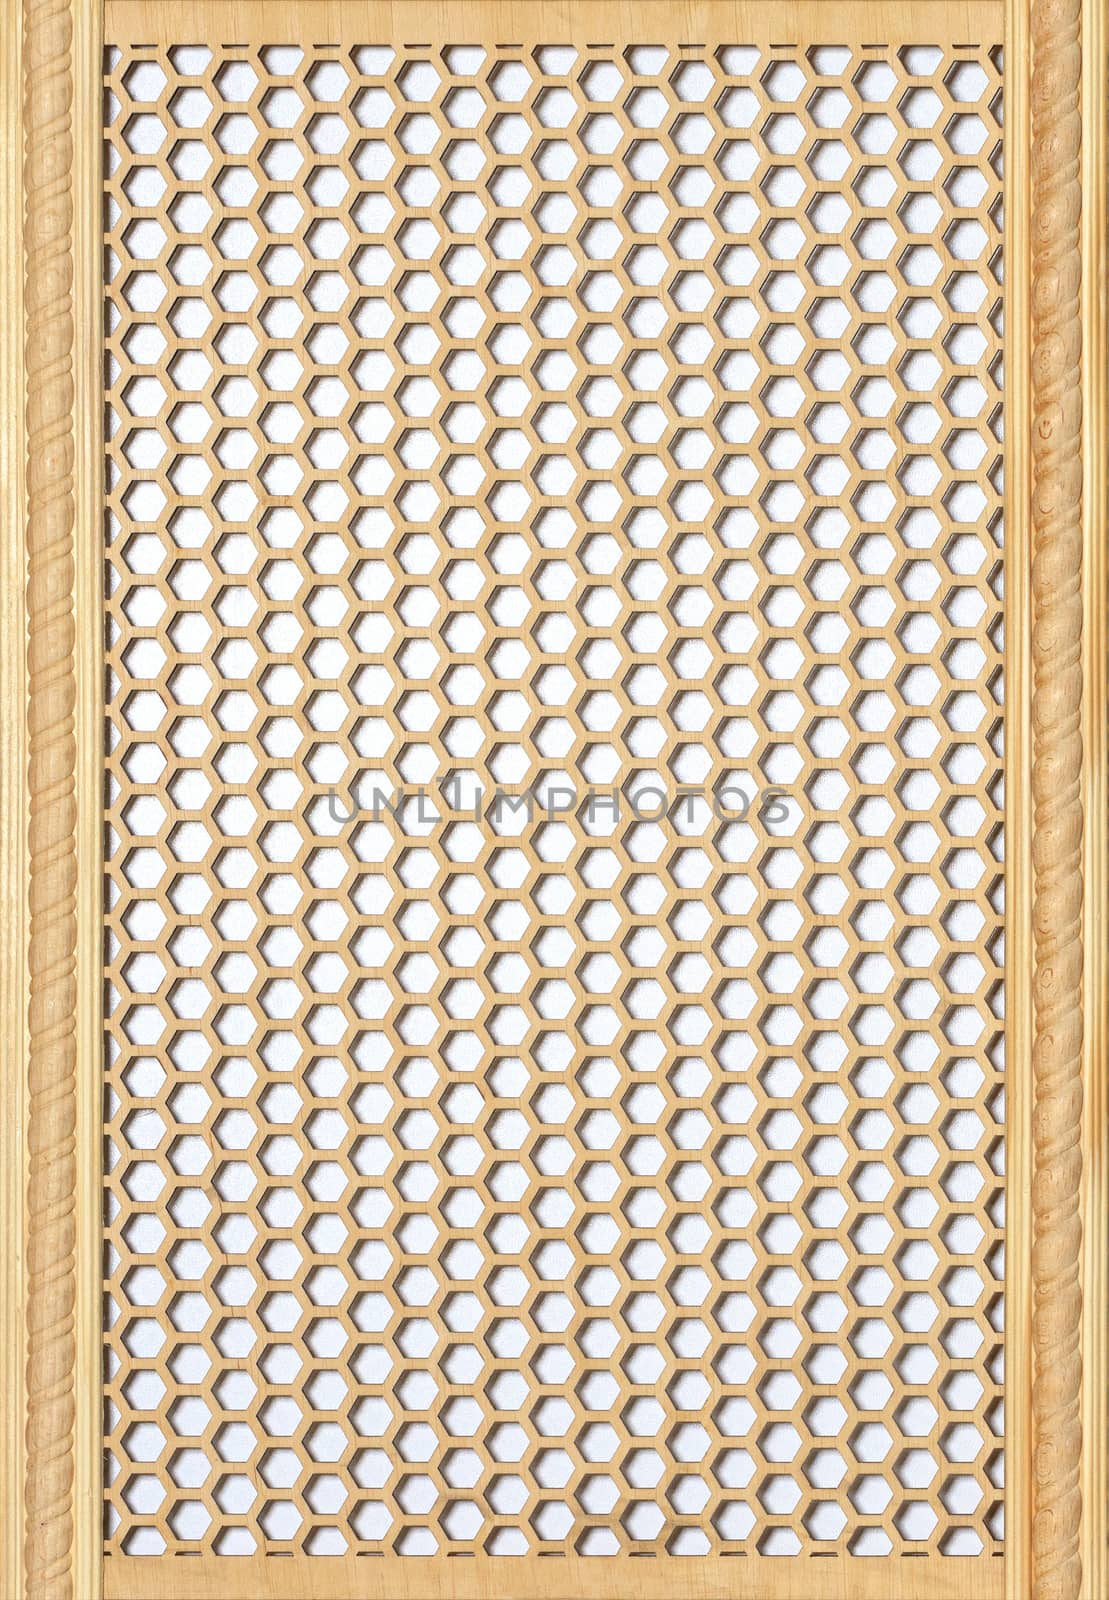 Wooden panel with pattern with delicate patternfor wall decoration. by Sergii